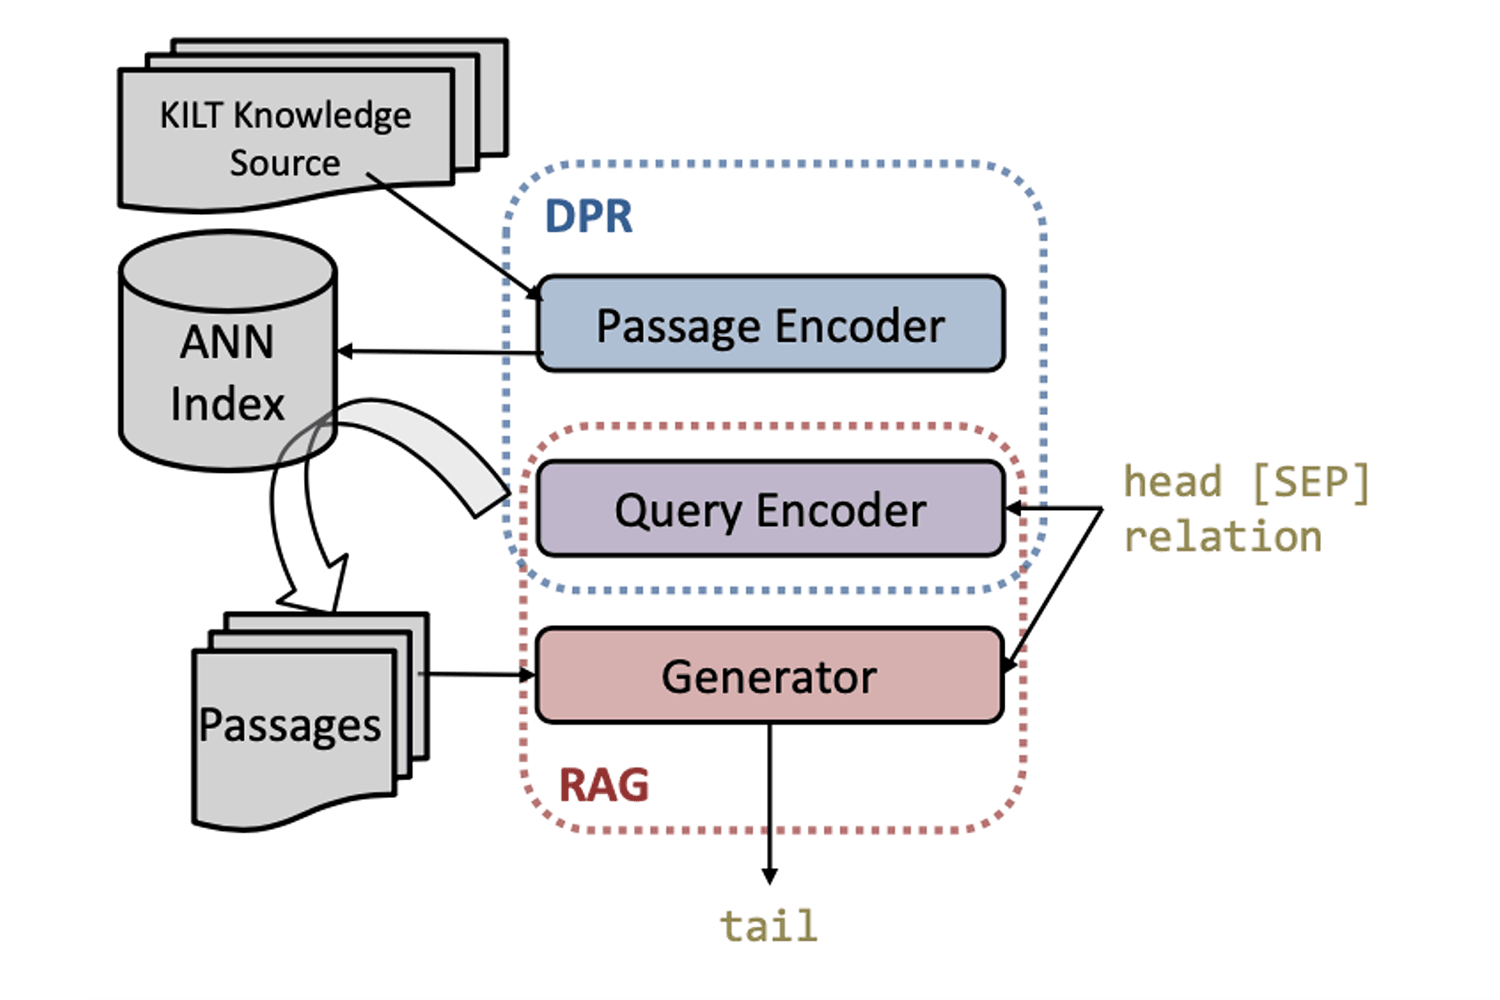 IBM’s approach to zero-shot slot filling is a sequence-to-sequence generative method based on a combination of Dense Passage Retrieval (DPR) and Retrieval Augmented Generation (RAG) — and both are trained for slot filling.